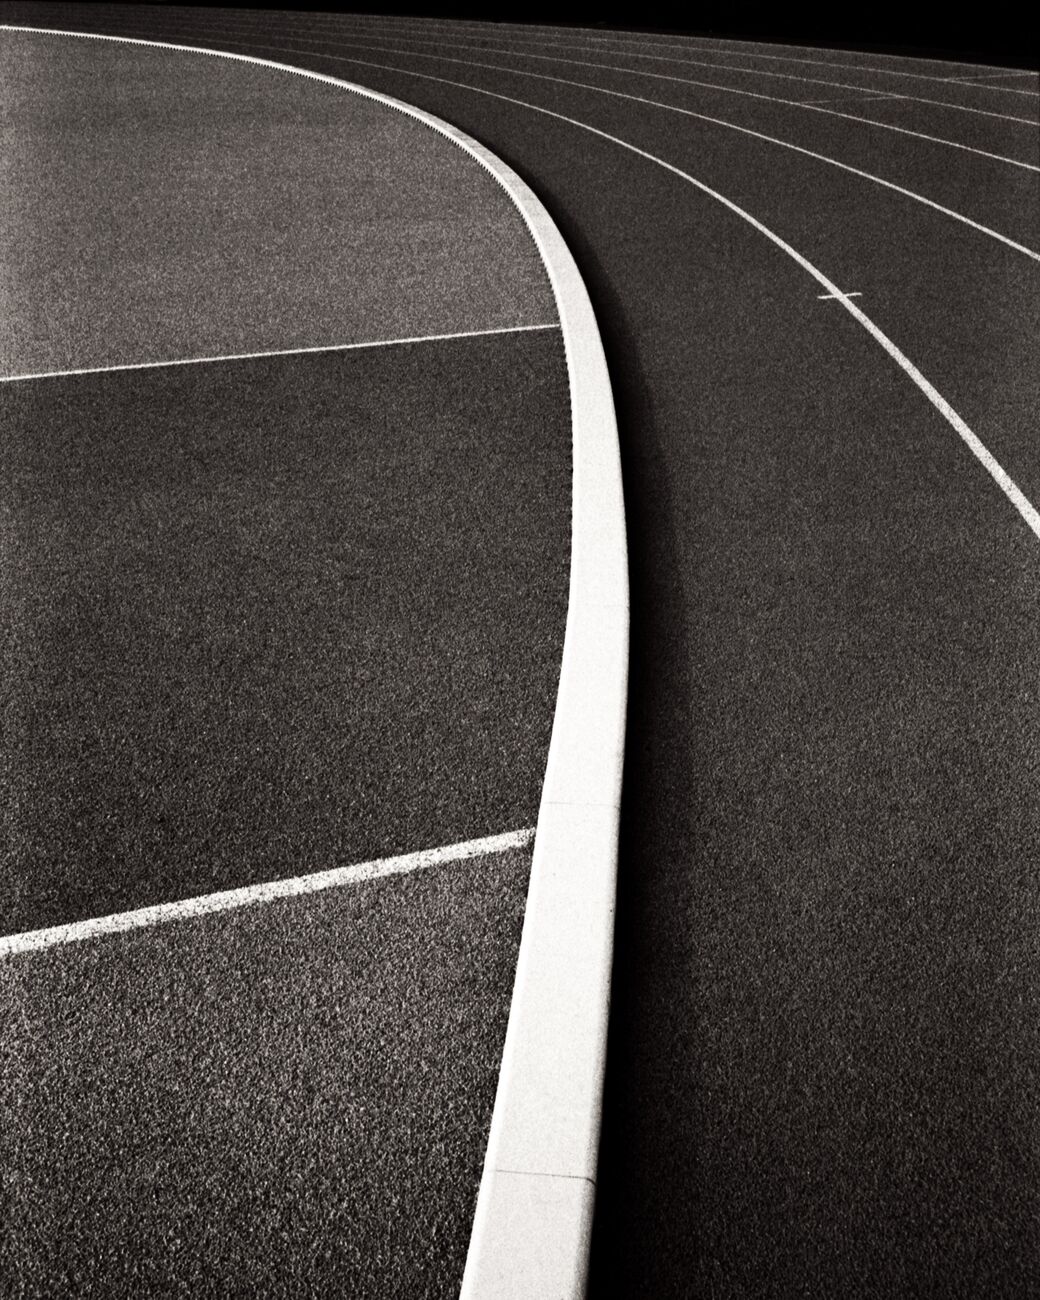 Get a 22 x 27.6 in, Running Track. Ref-11621-15 - Denis Olivier Art Photography